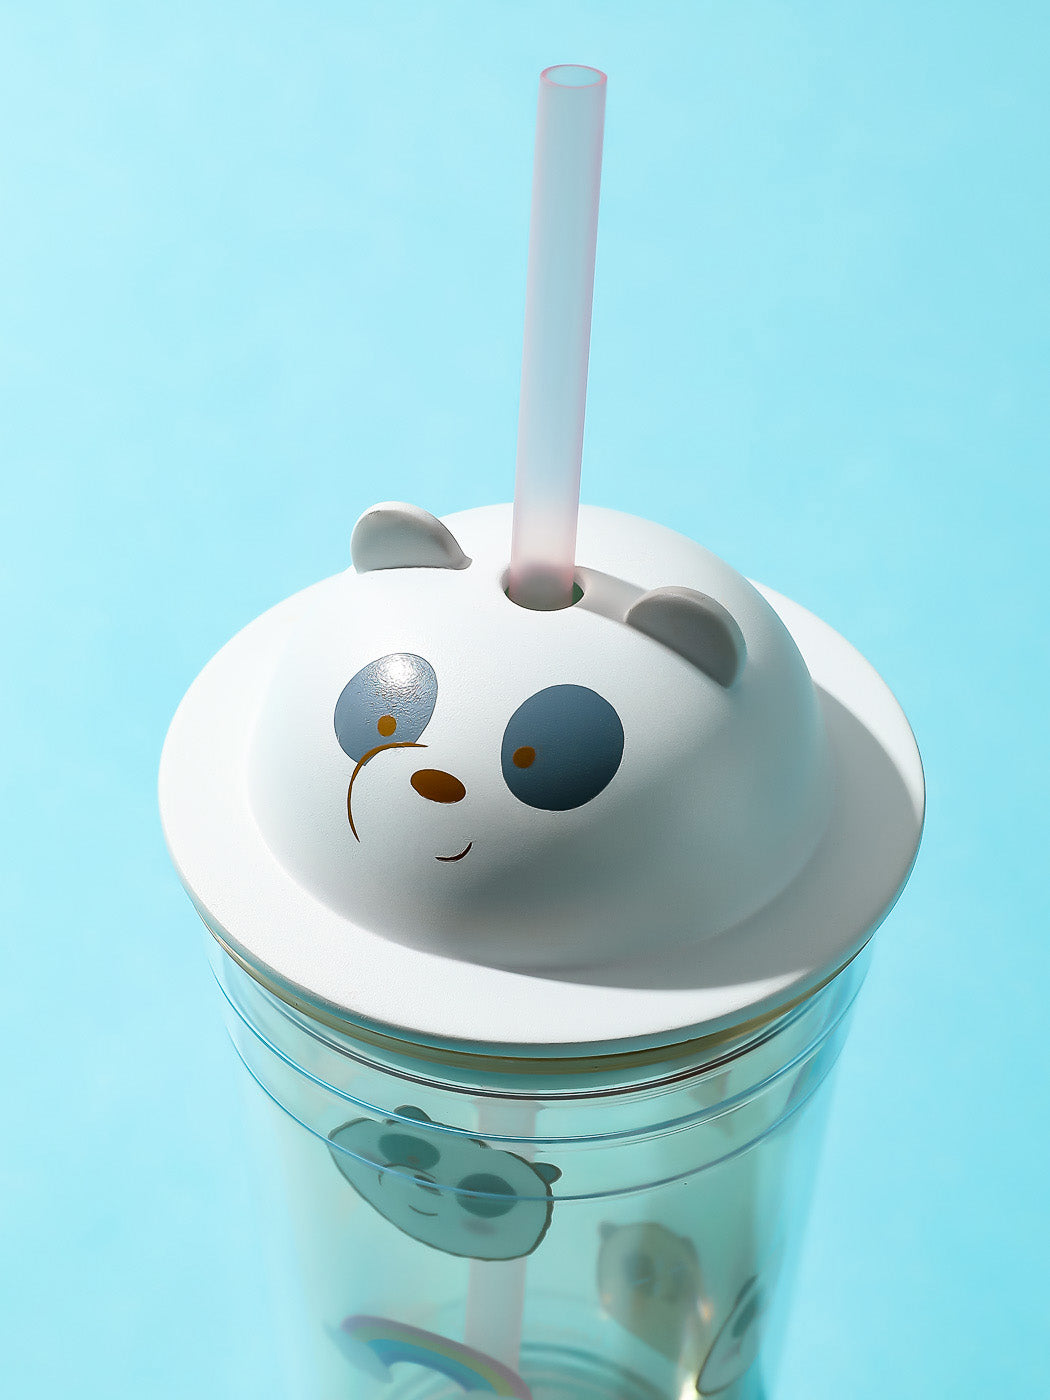 MINISO WE BARE BEARS COLLECTION 4.0 TUMBLER WITH STRAW 440ML(PANDA) 2010863512105 PLASTIC WATER BOTTLE